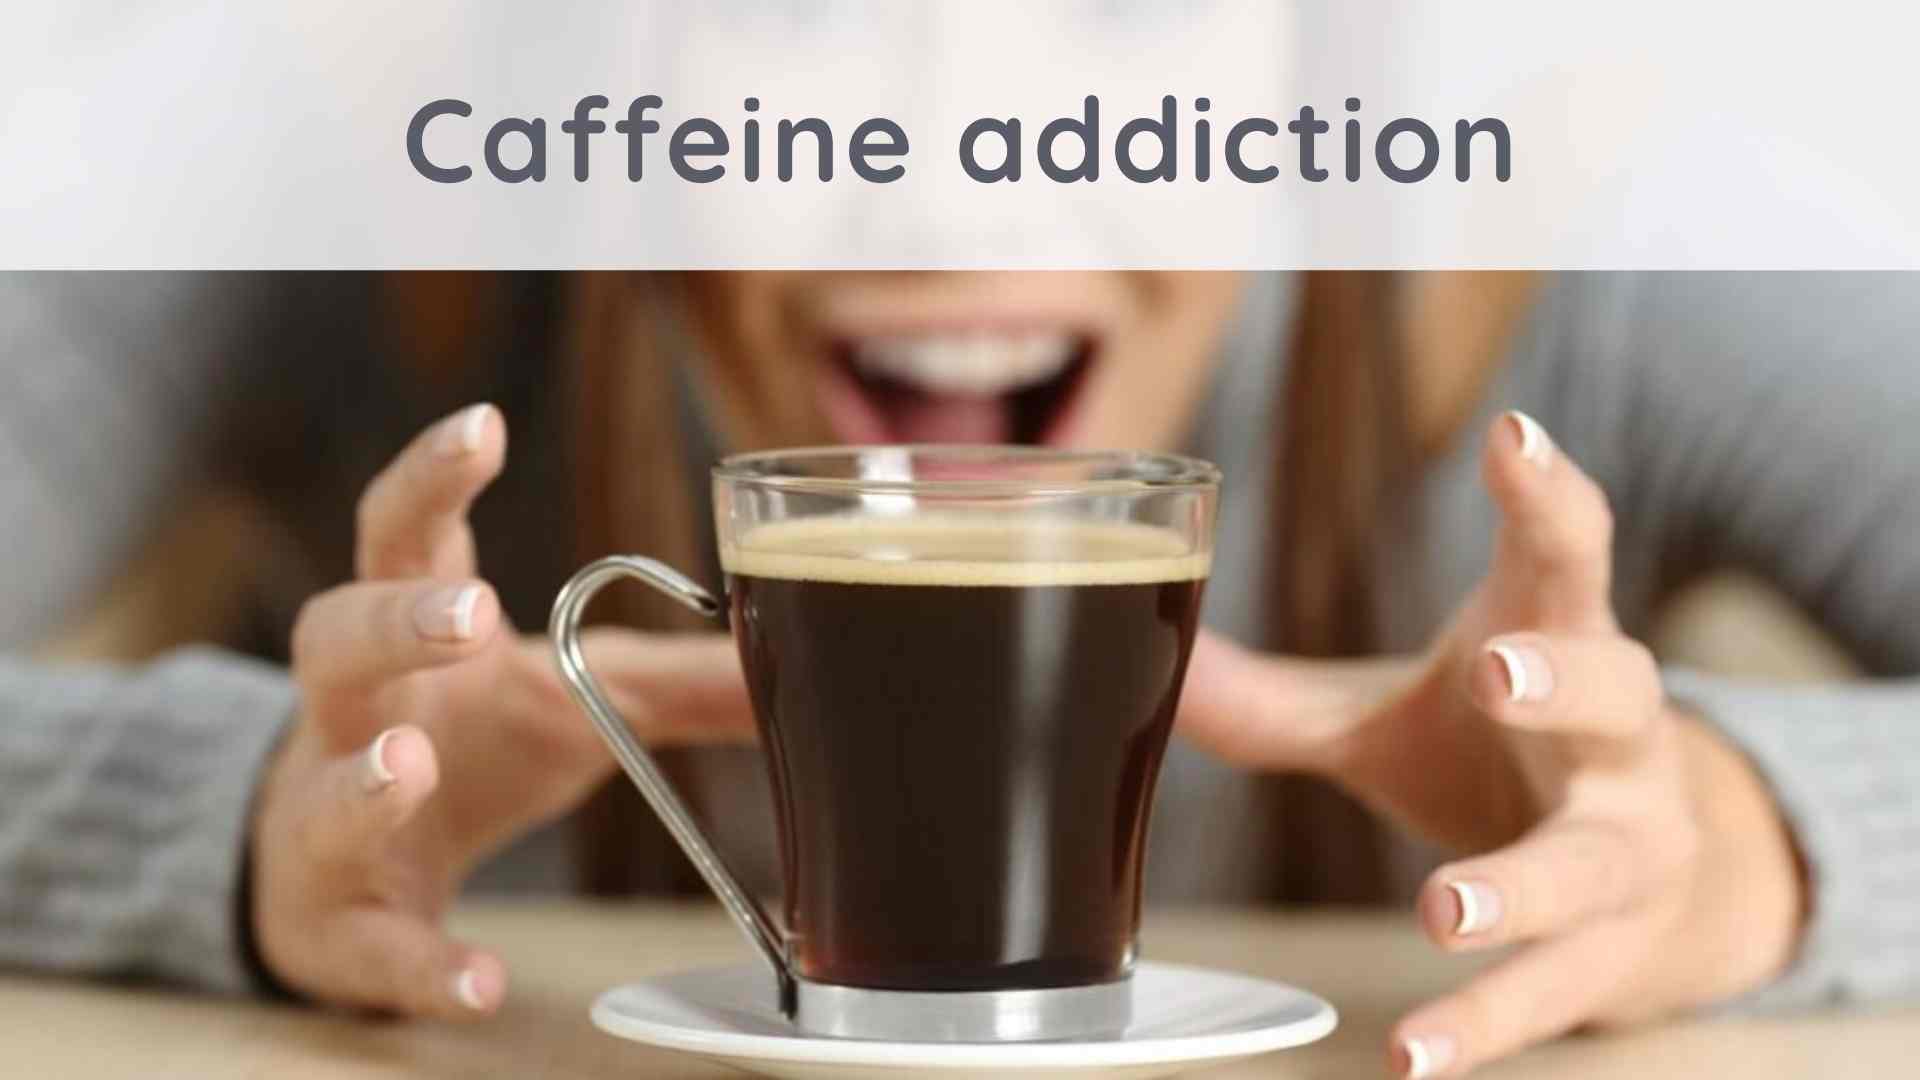 Caffeine Addiction and Abuse - Get Help Today - Rehab Spot